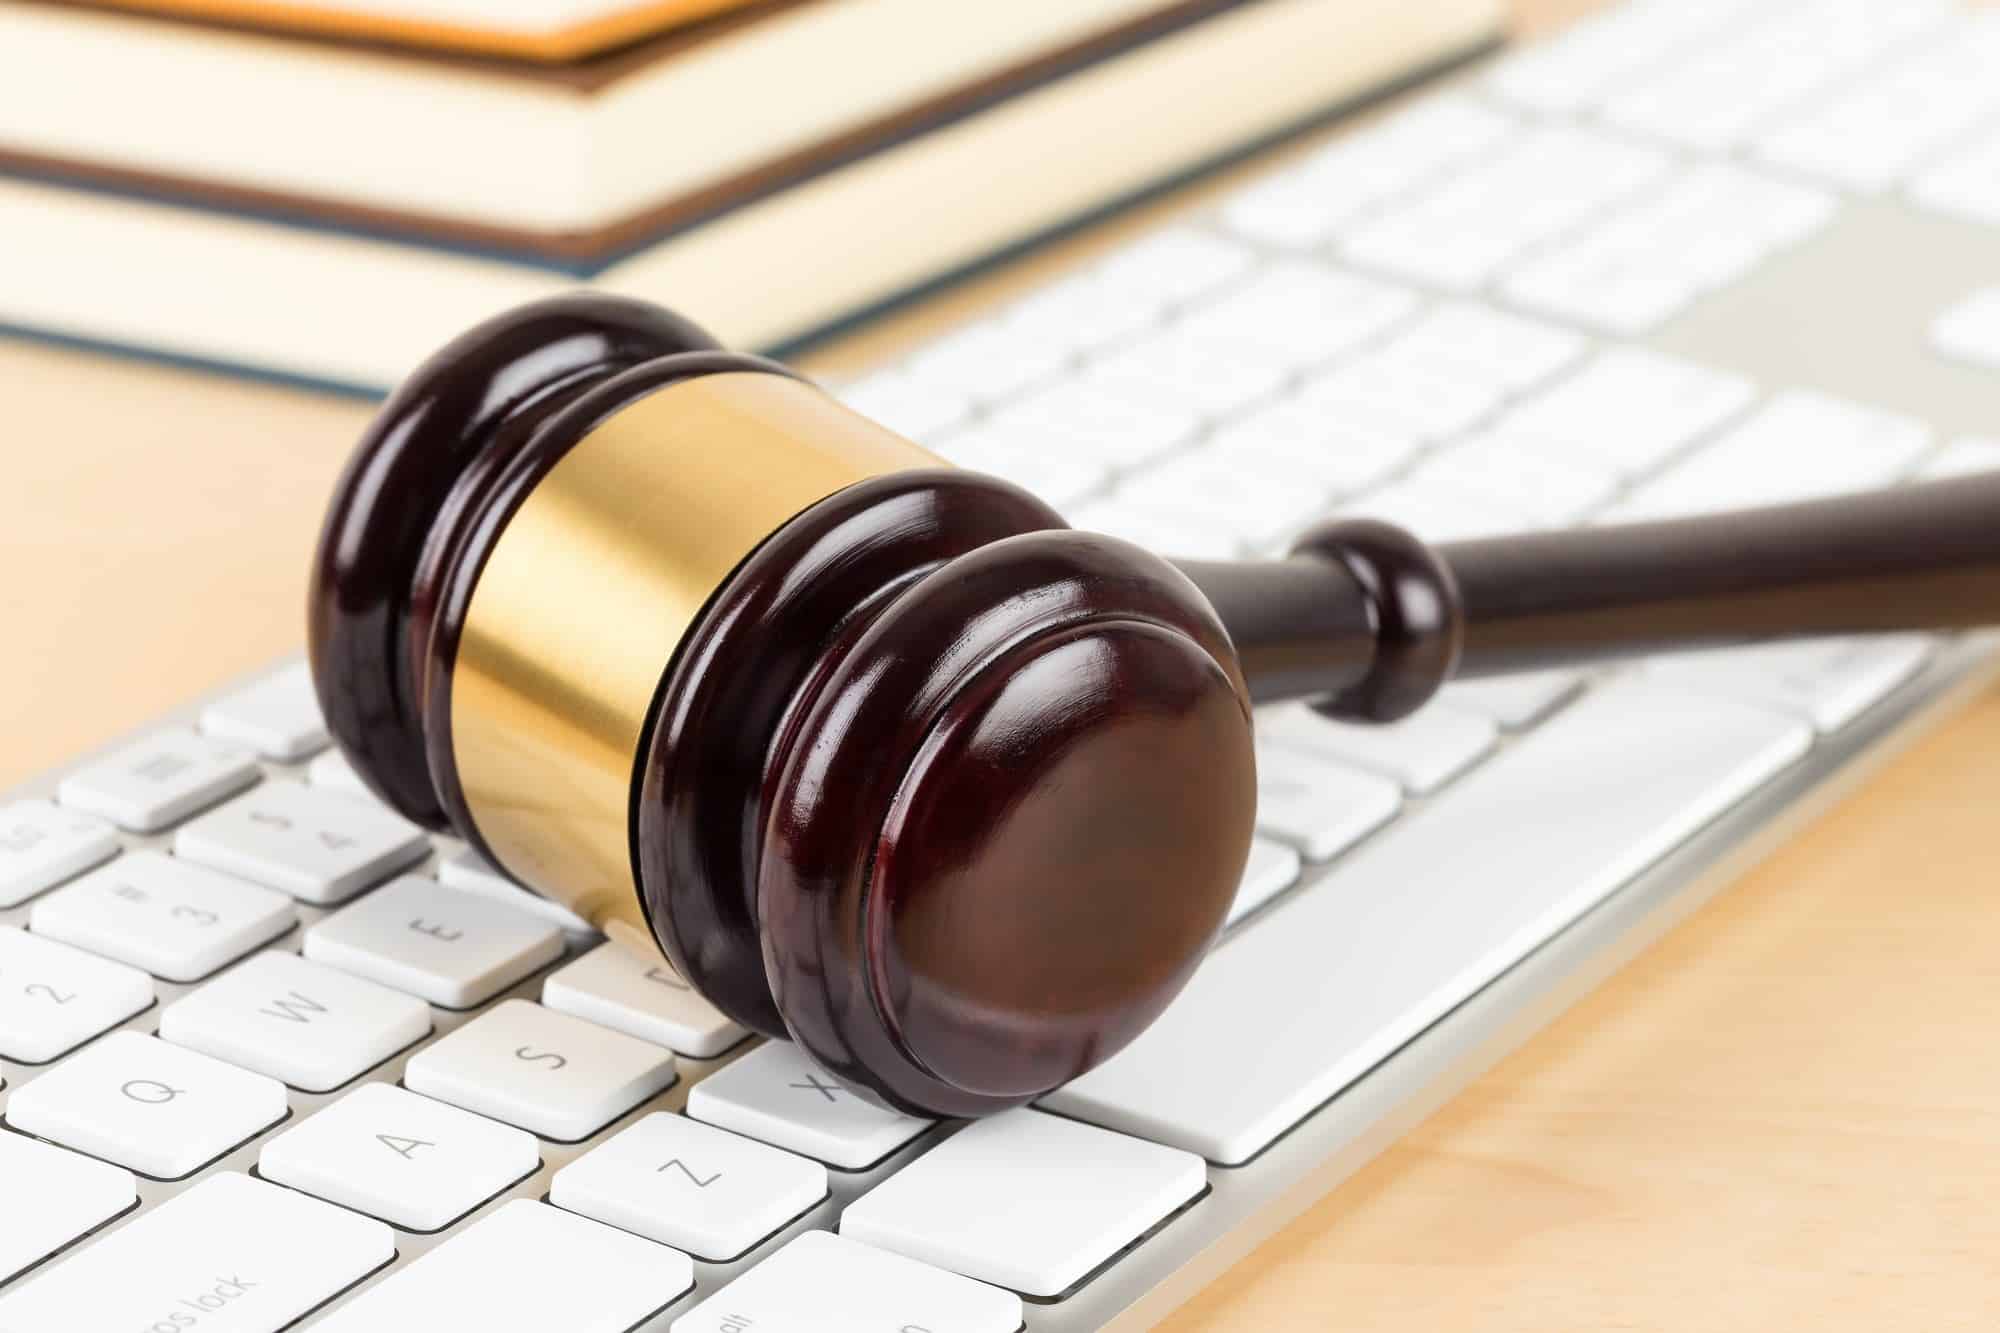 Making Your Company's Case- Creating Amazing Lawyer Websites